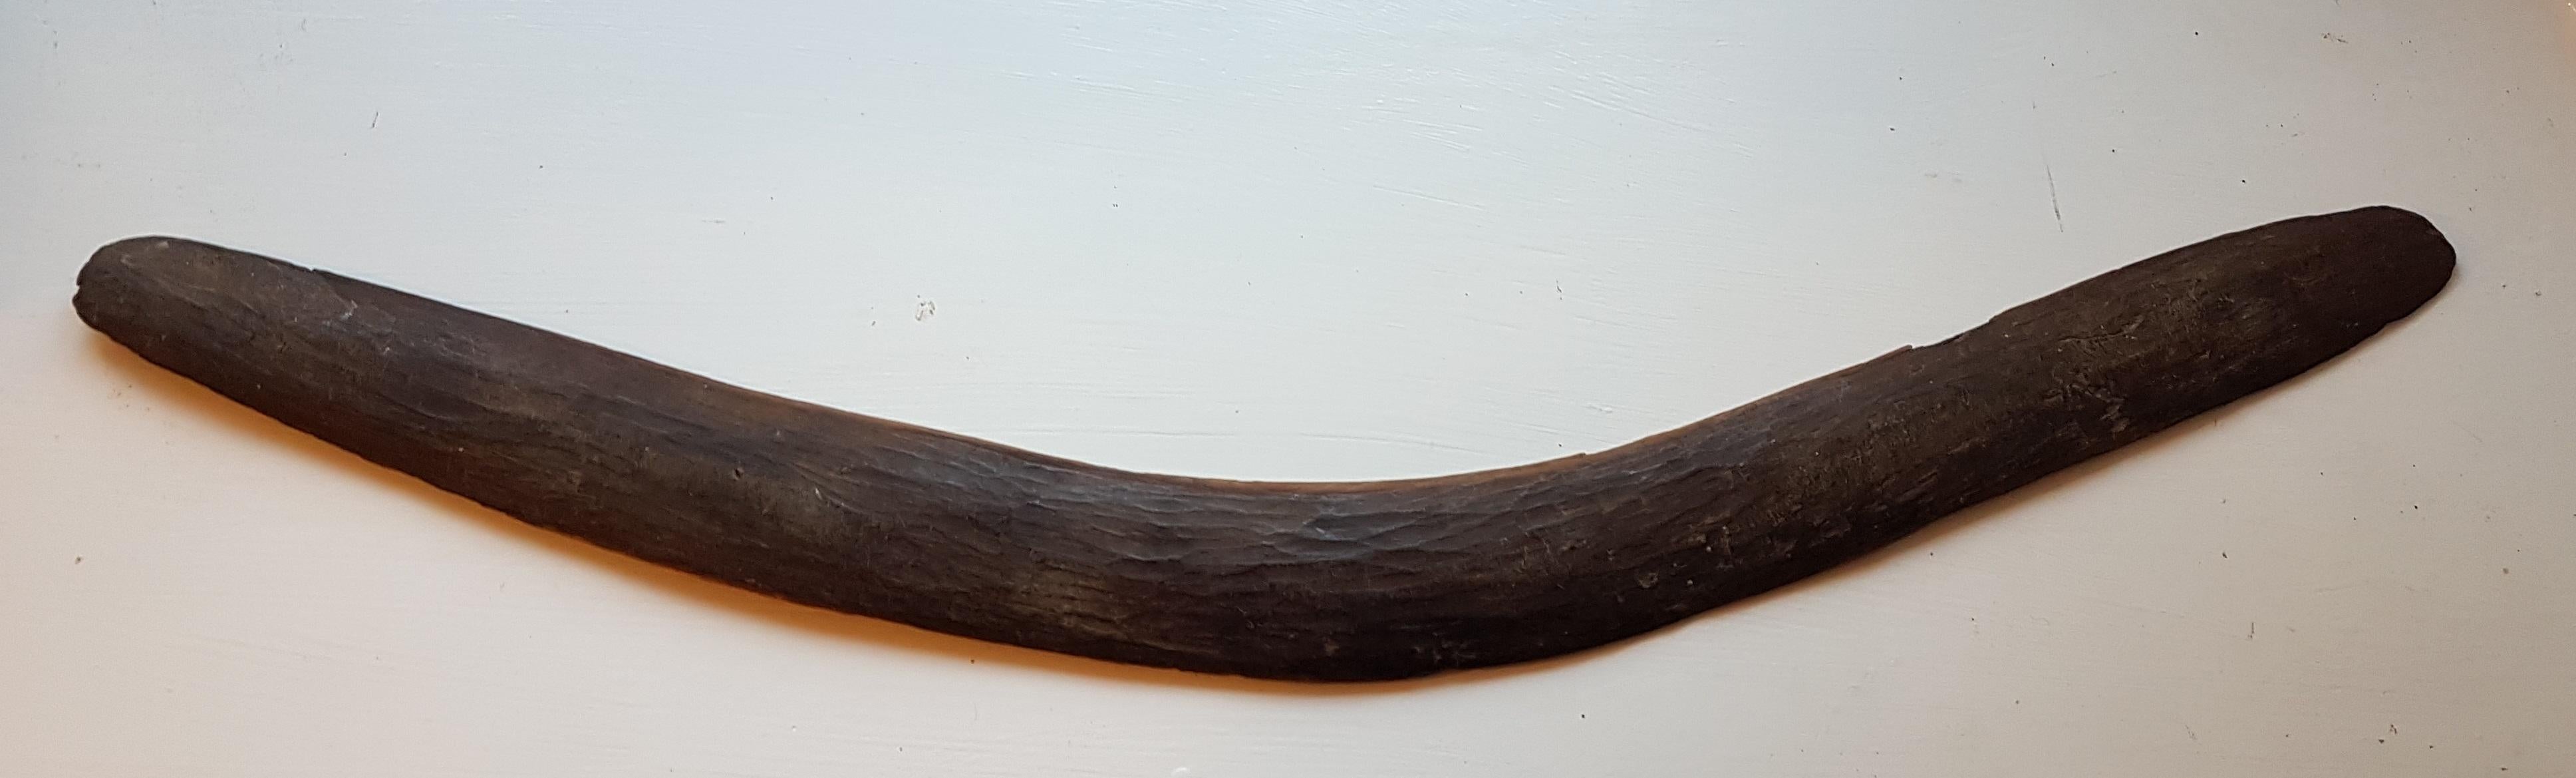 boomerangs for sale